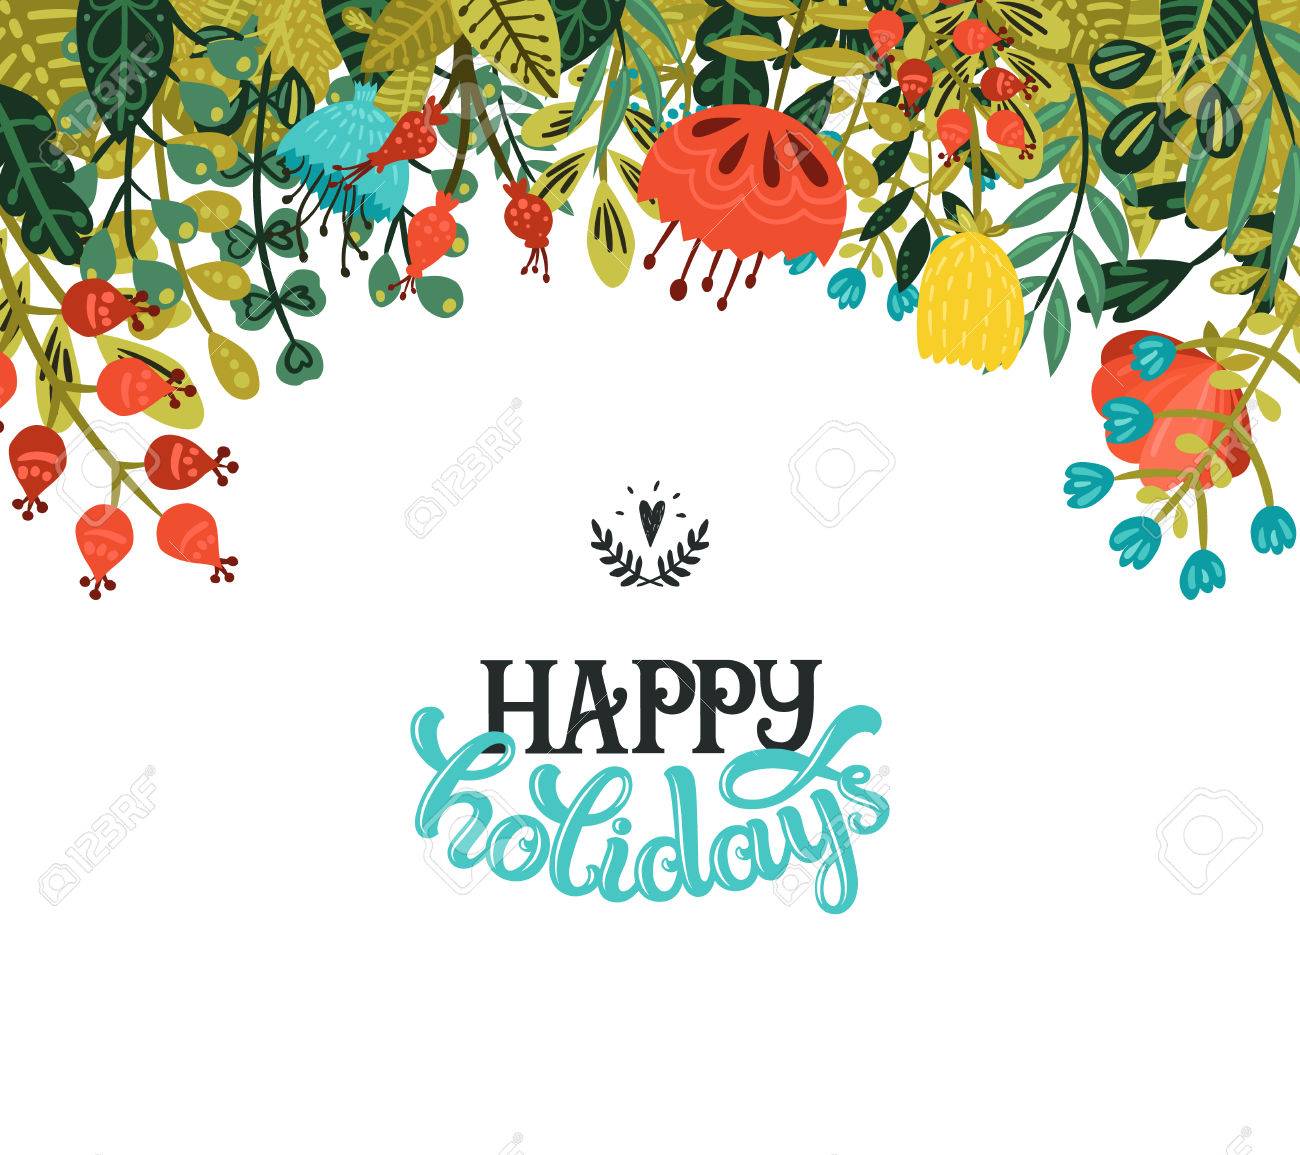 Happy Holidays Vector Text And Flower Background Photo Overlay